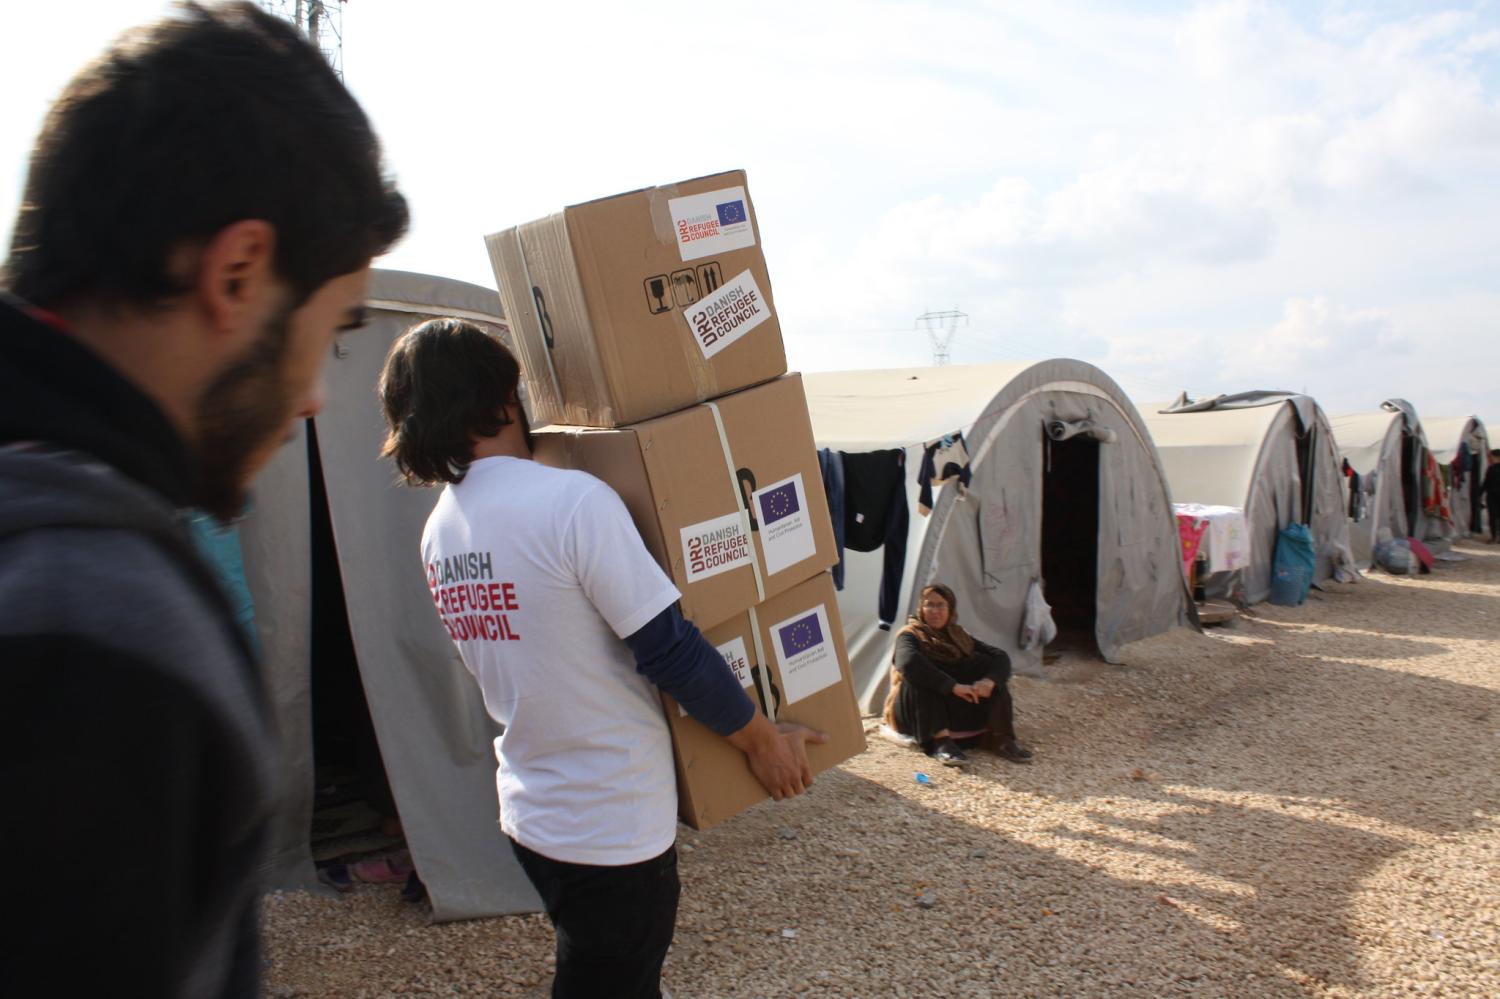 Families at a Syrian refugee camp in Turkey receive relief supplies from the Danish Refugee Council. (Flickr/European Union)